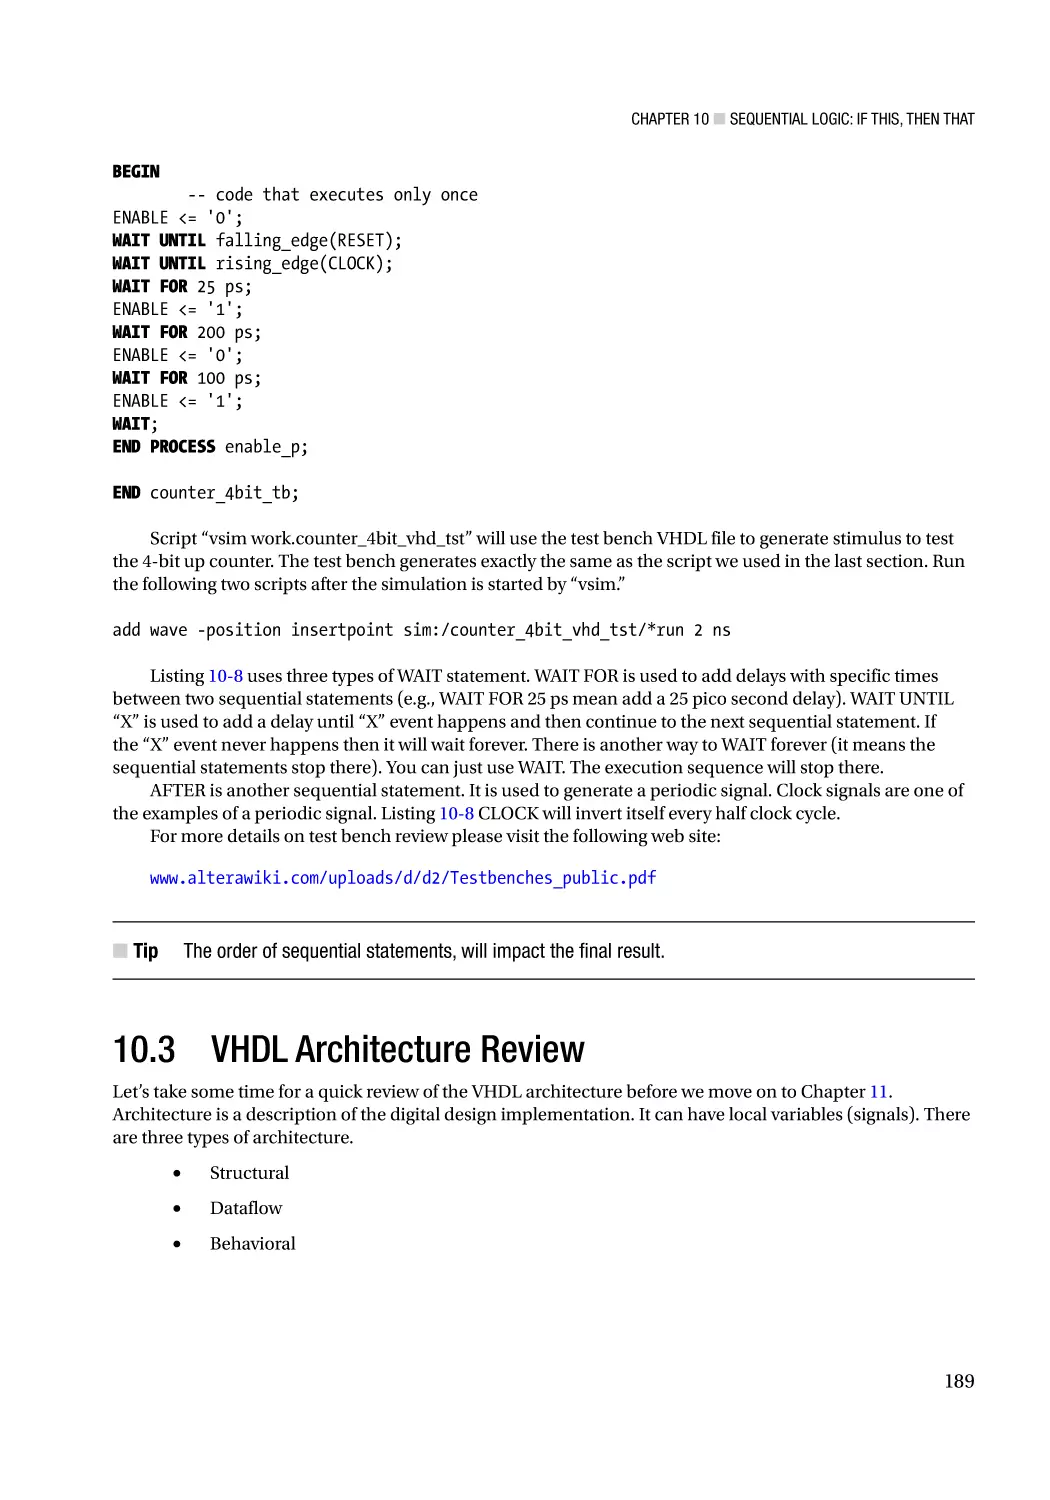 10.3 VHDL Architecture Review